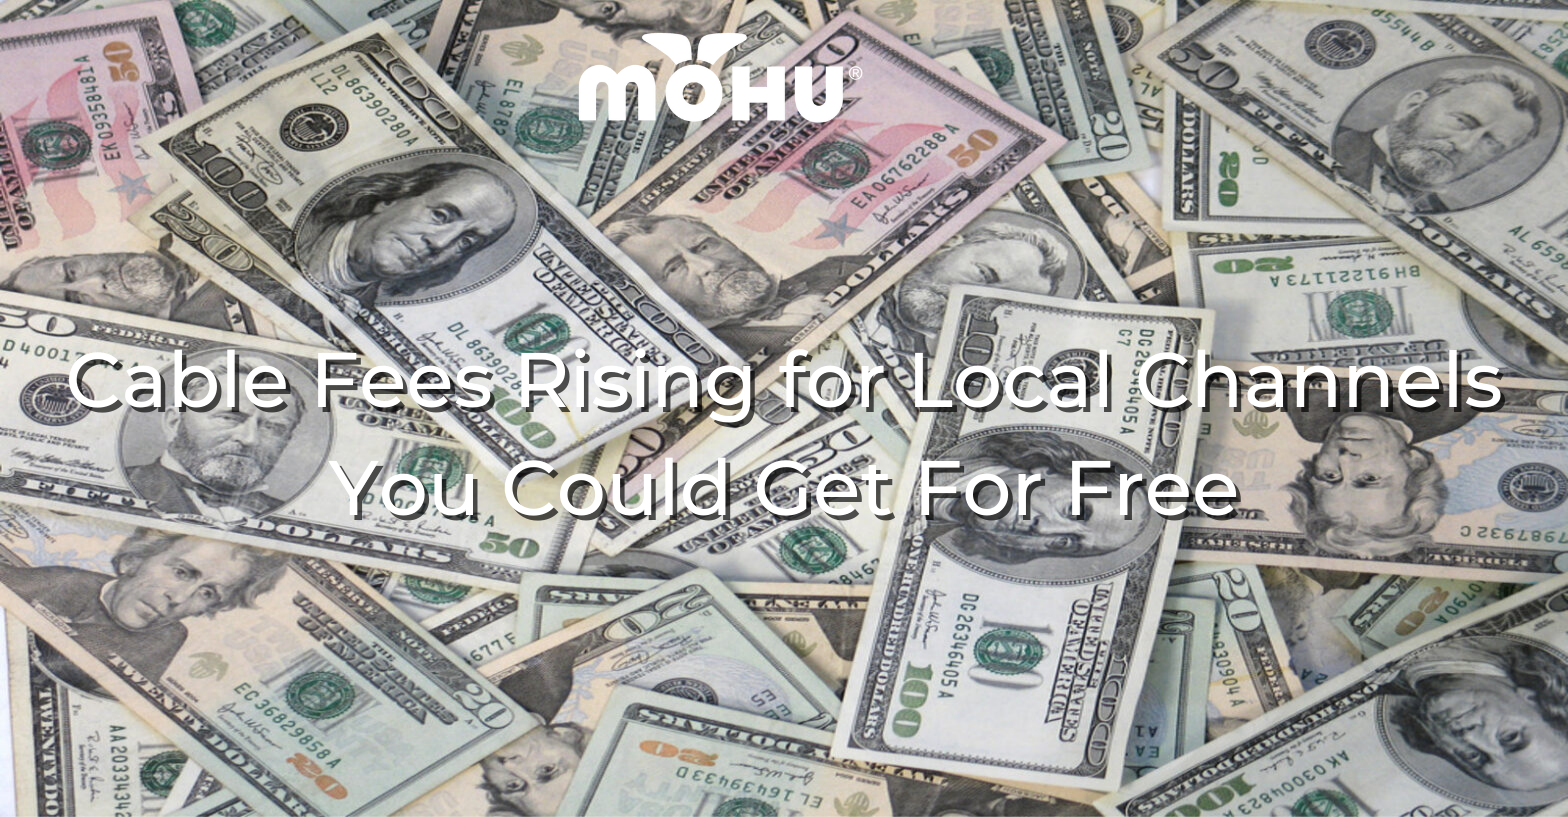 Pile of cash with the copy "Cable Fees Rising for Local Channels You Could Get For Free" and Mohu logo